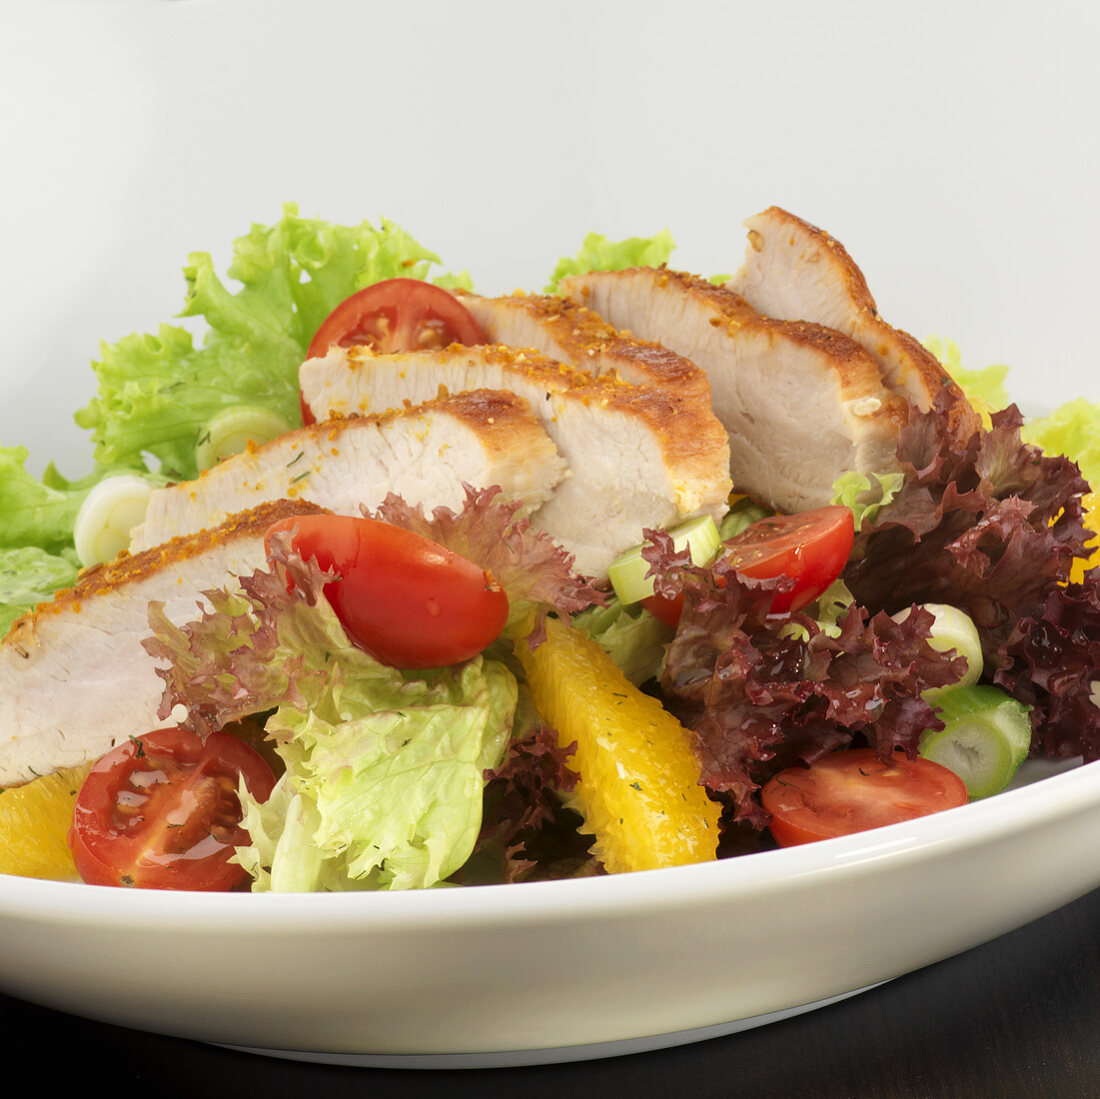 Plate of salad with sliced turkey